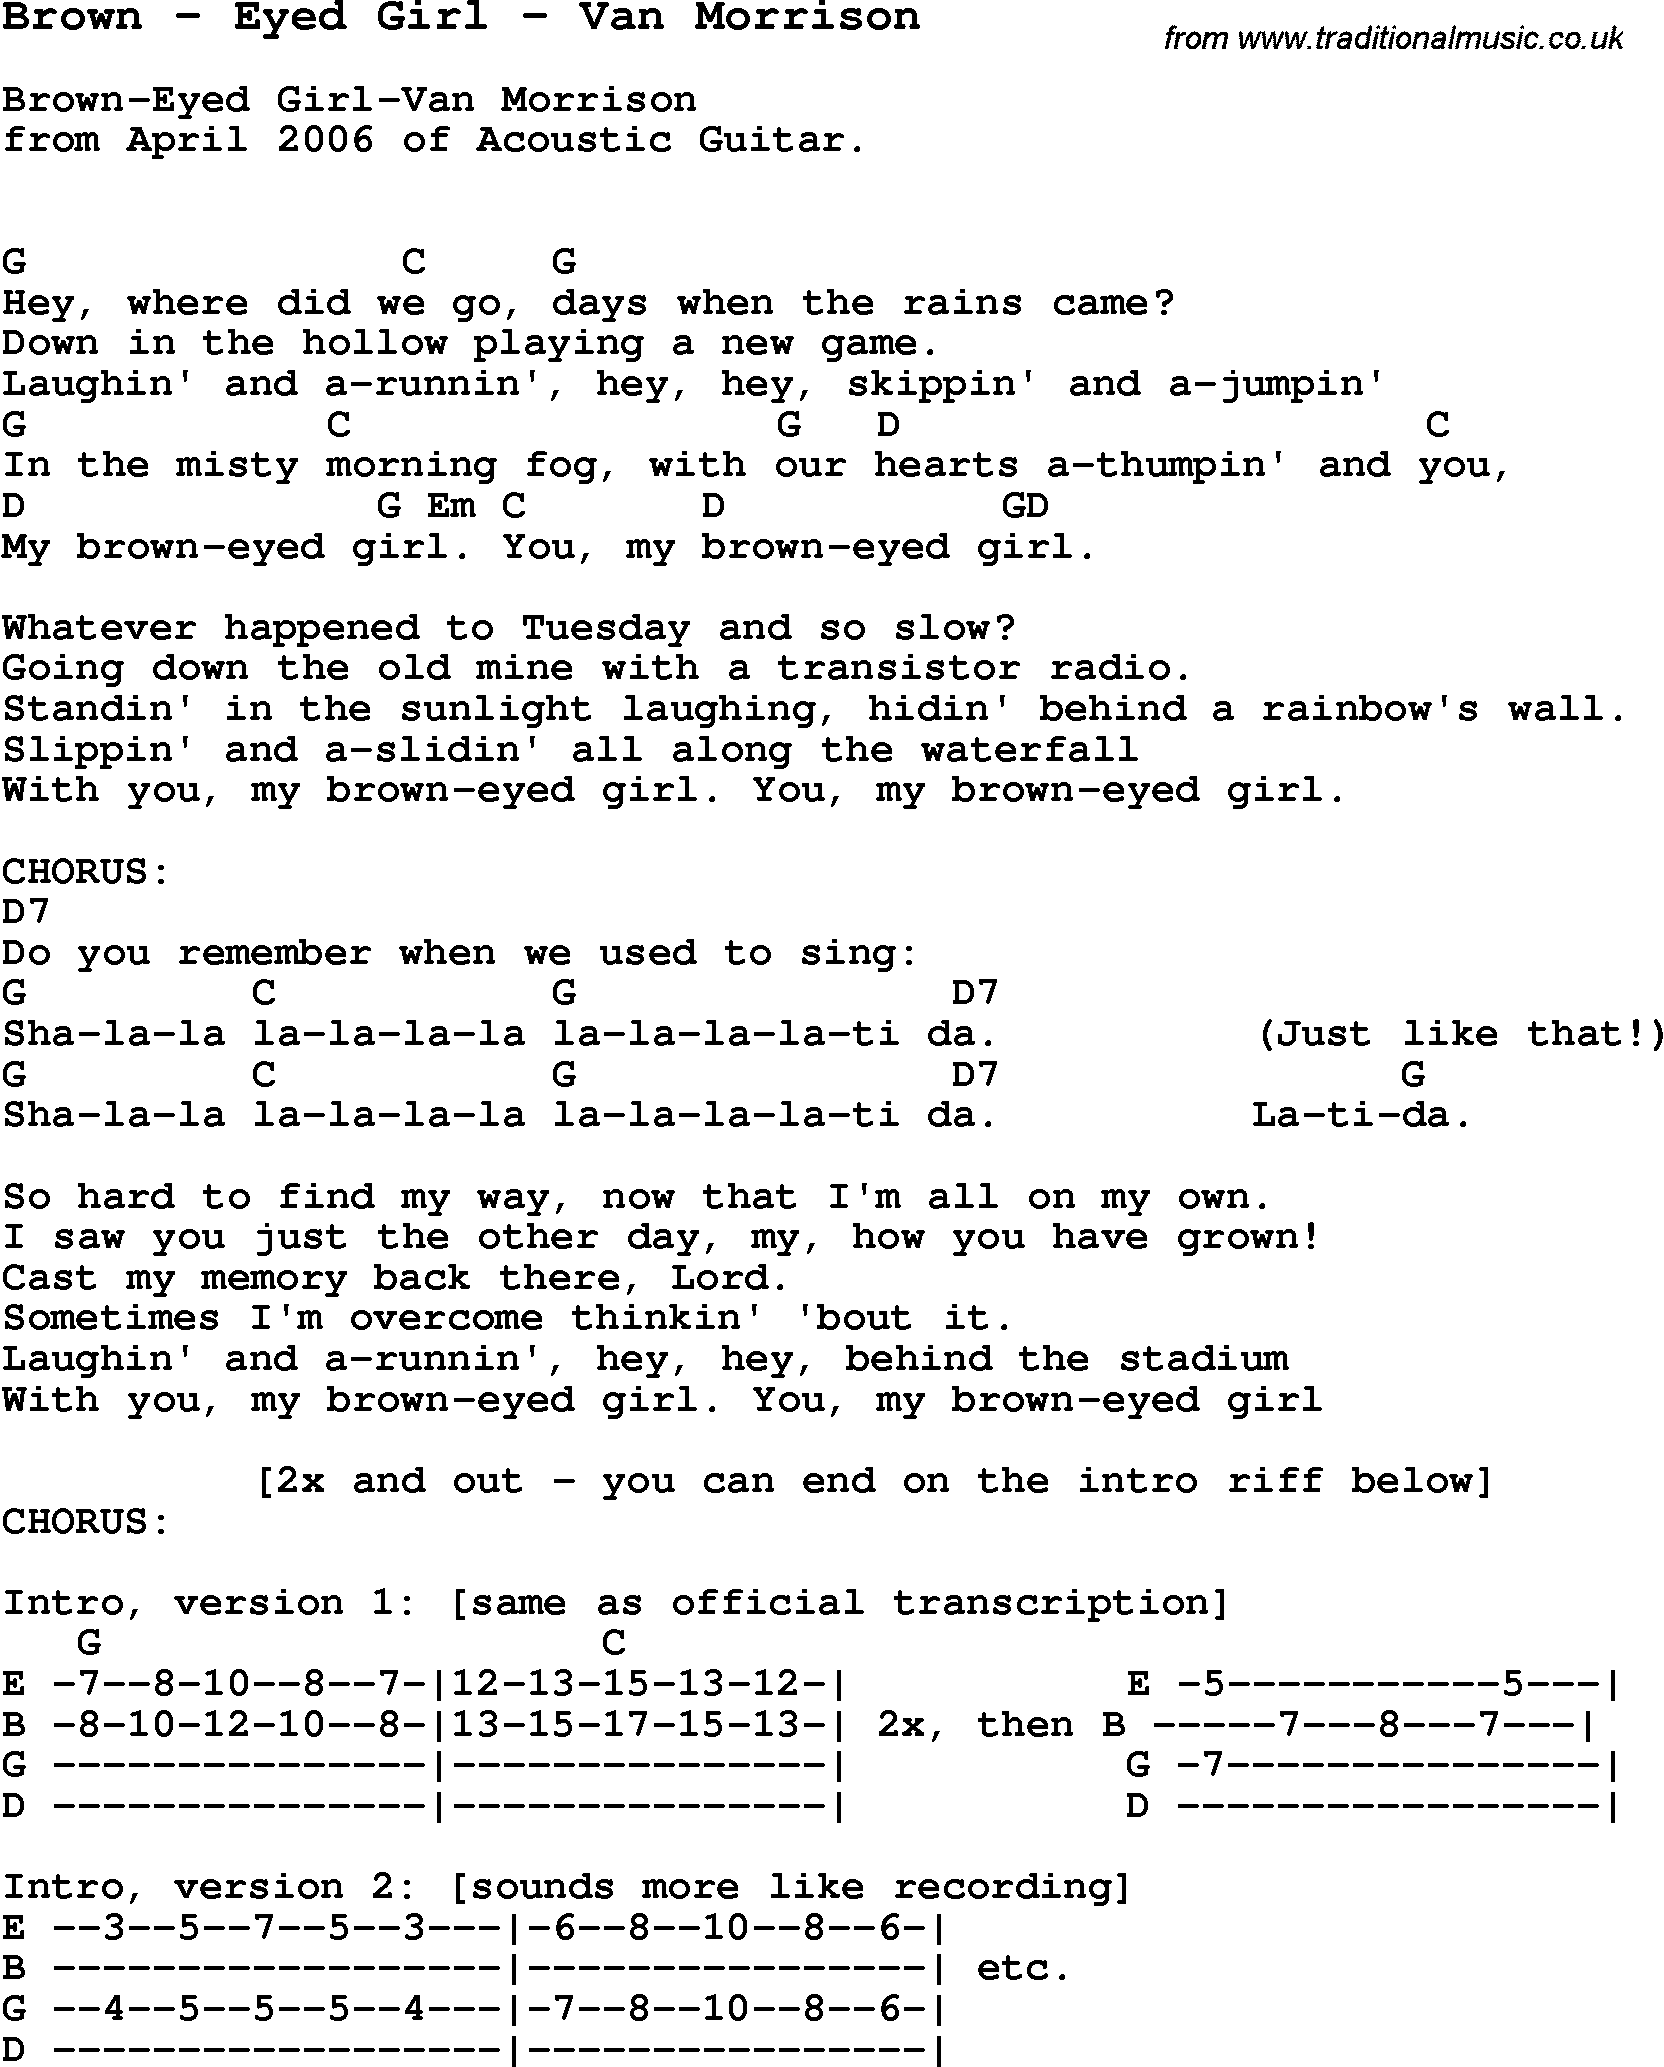 chap auktion hellig Song Brown by Eyed Girl by Van Morrison, song lyric for vocal performance  plus accompaniment chords for Ukulele, Guitar, Banjo etc.